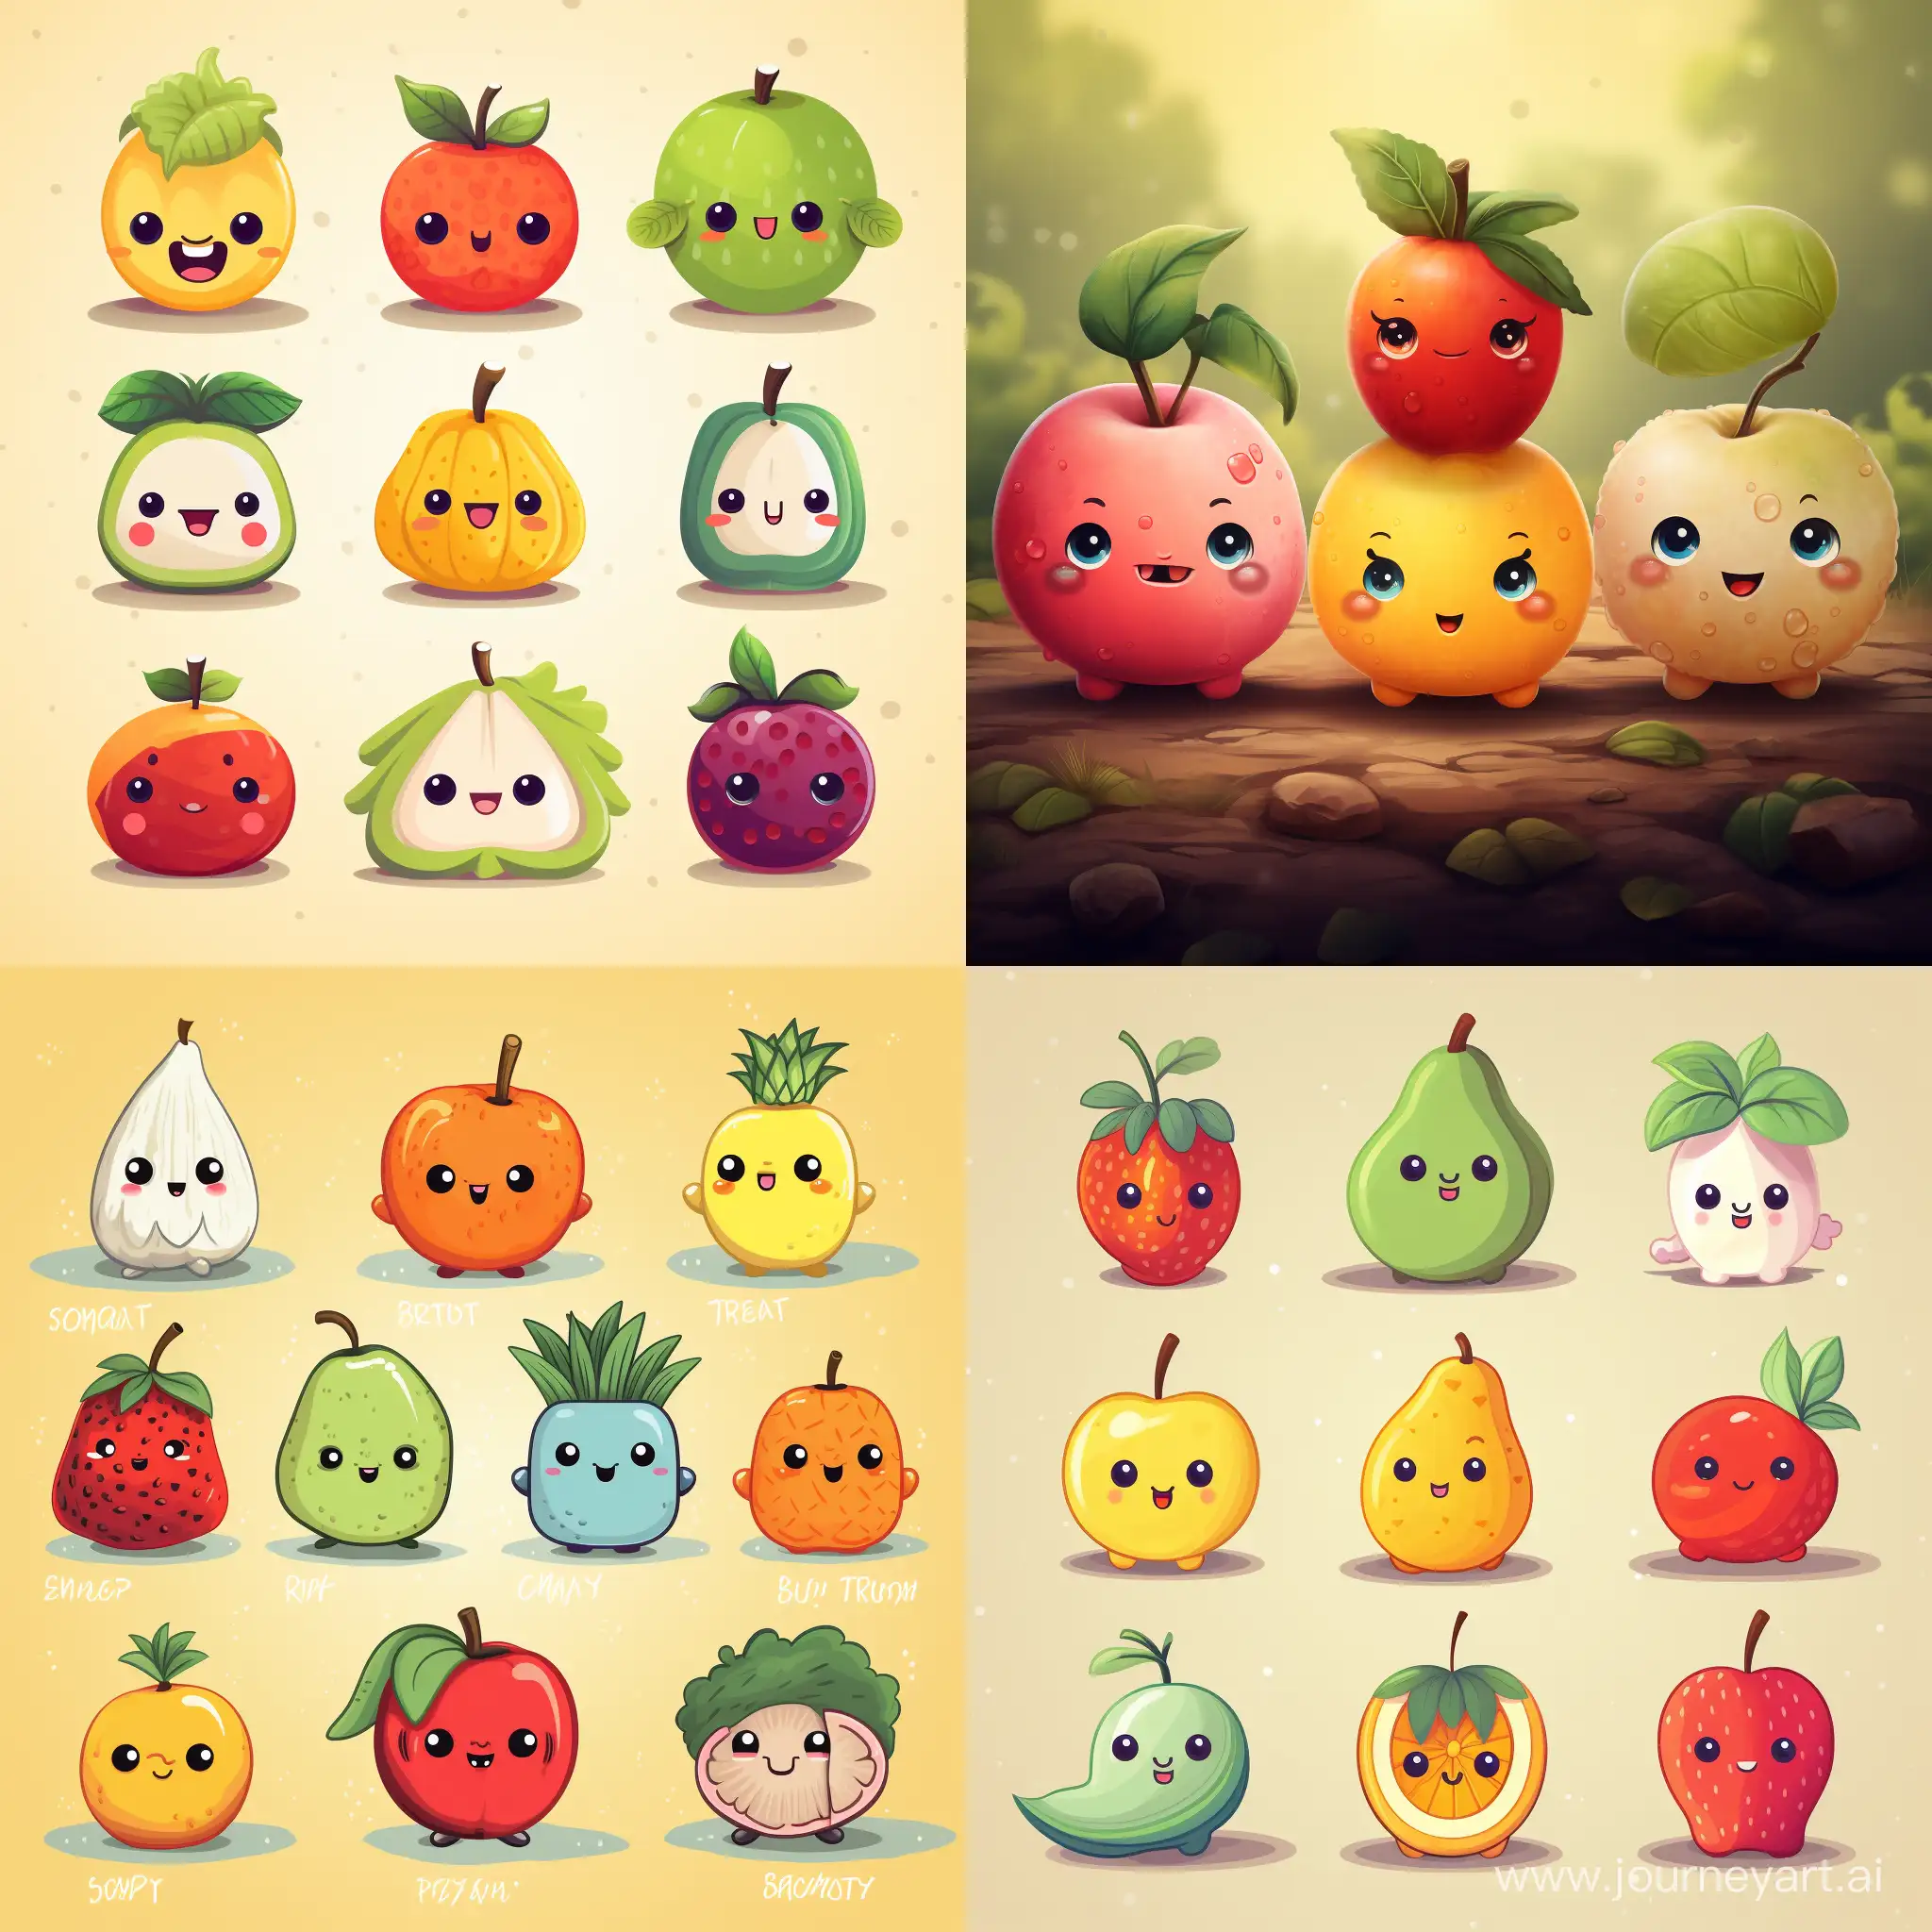 Colorful-Collage-of-Adorable-Fruits-in-Perfect-Harmony